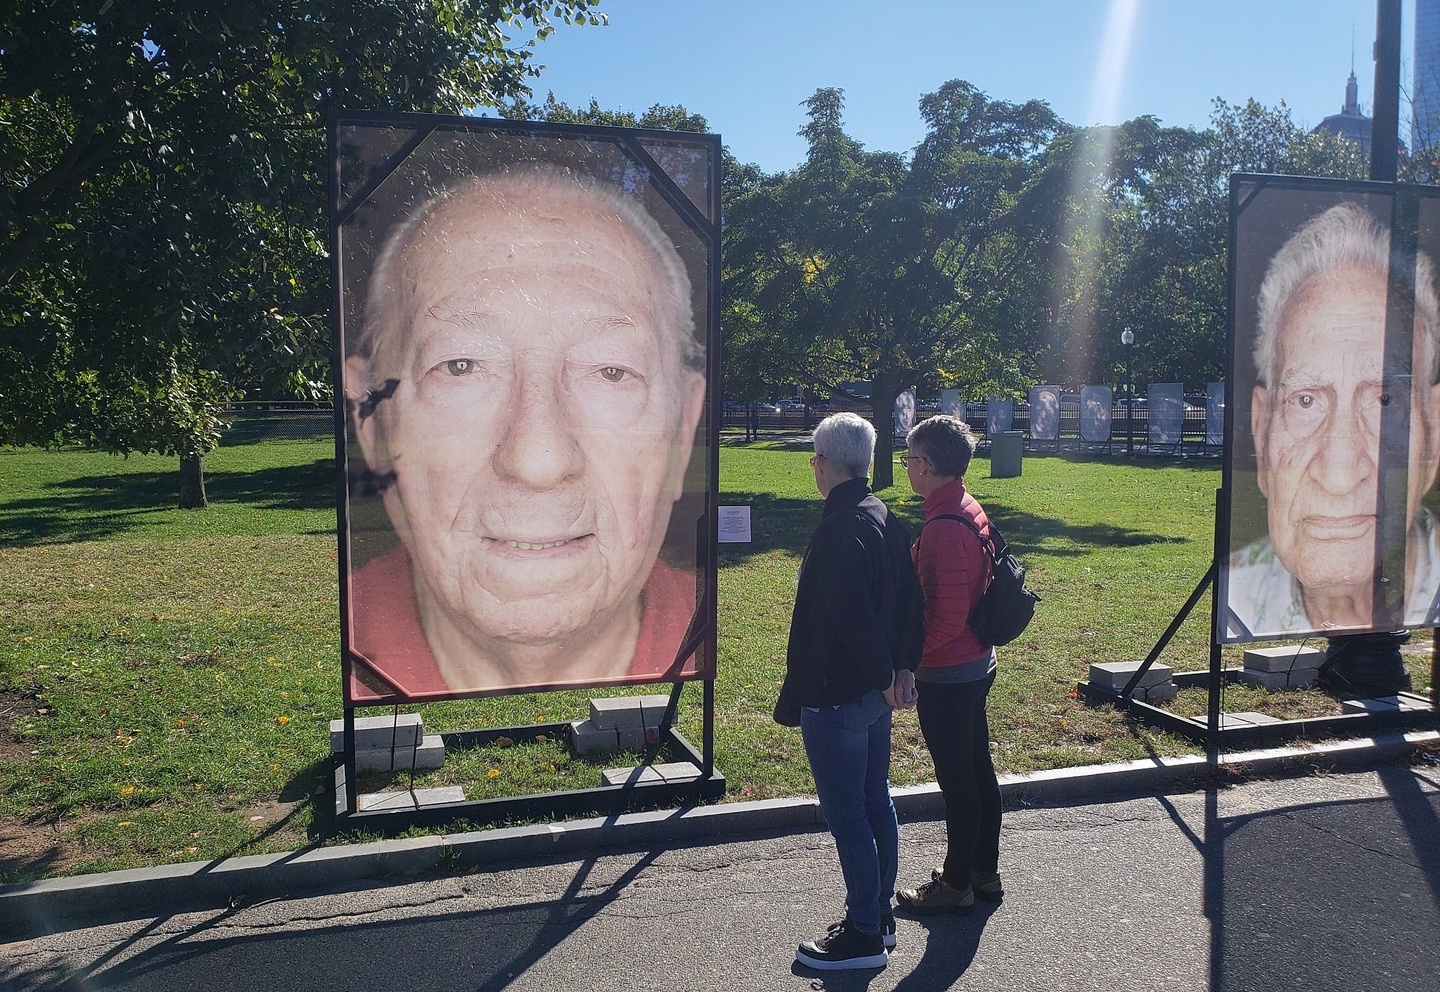 People in a park looking at large photographic portraits of older men